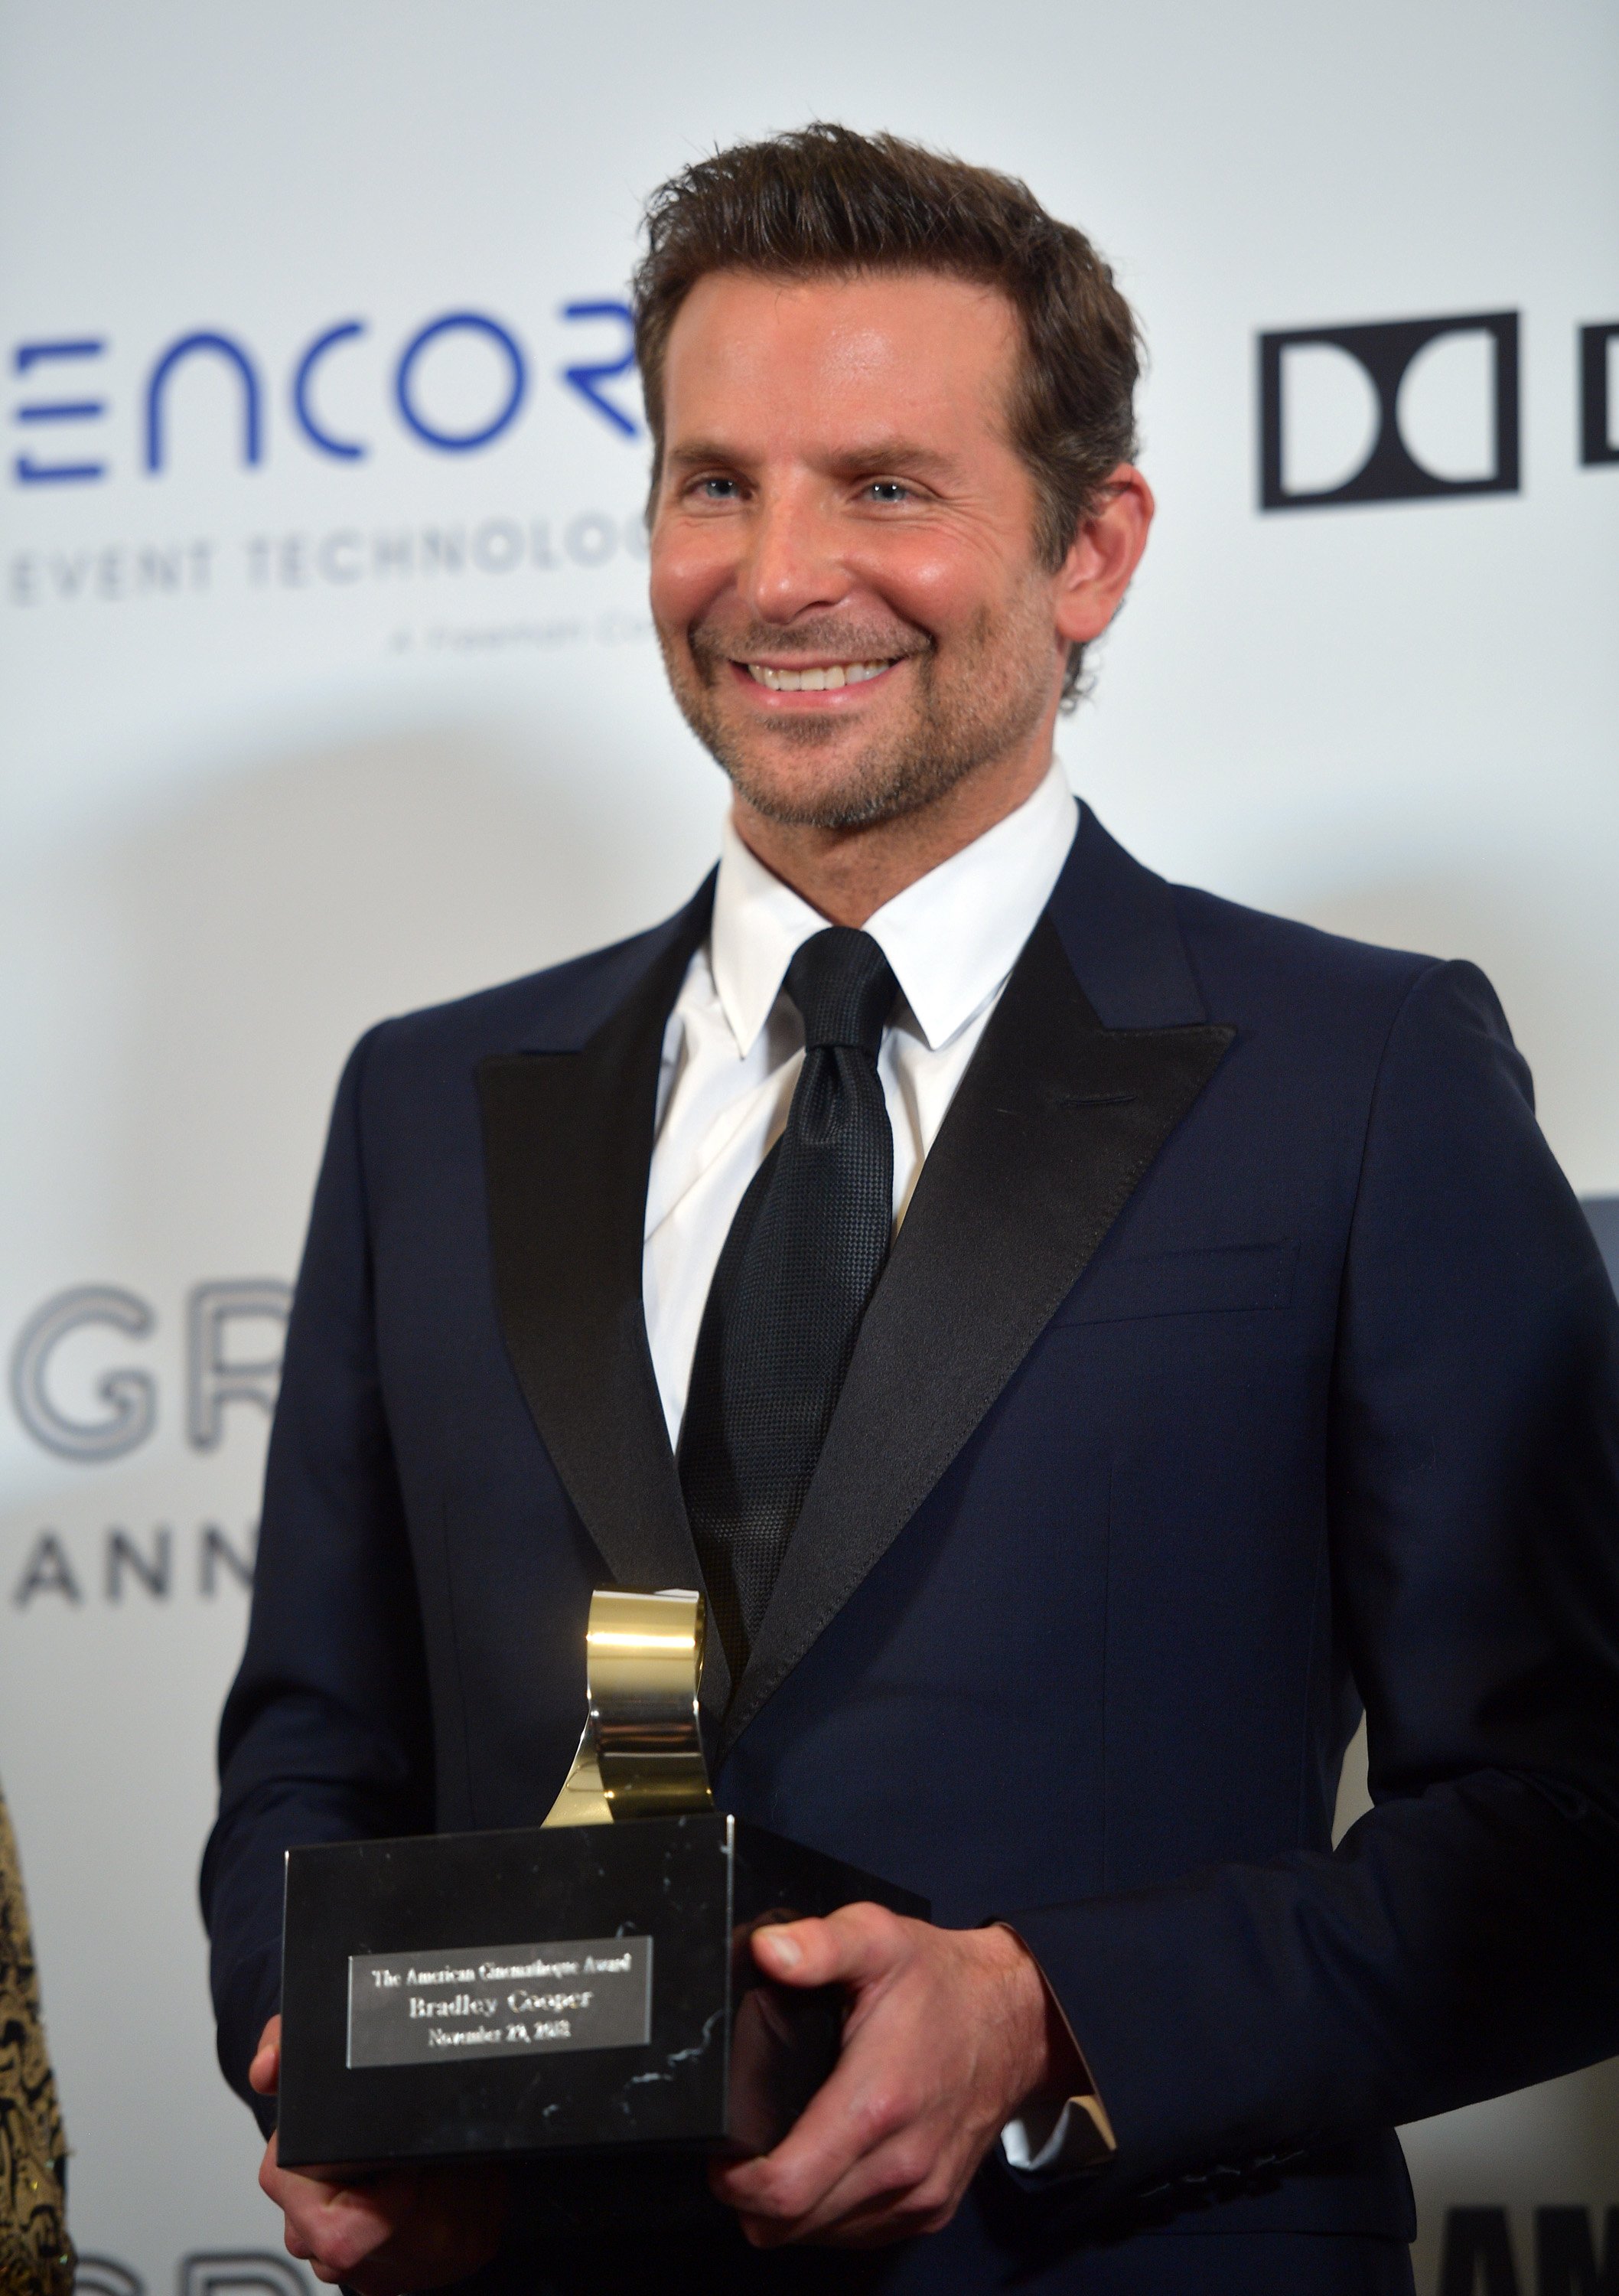 Bradley Cooper at the 32nd American Cinematheque Award Presentation Honoring Bradley Cooper on November 29, 2018 in Beverly Hills, California. | Photo: Getty Images